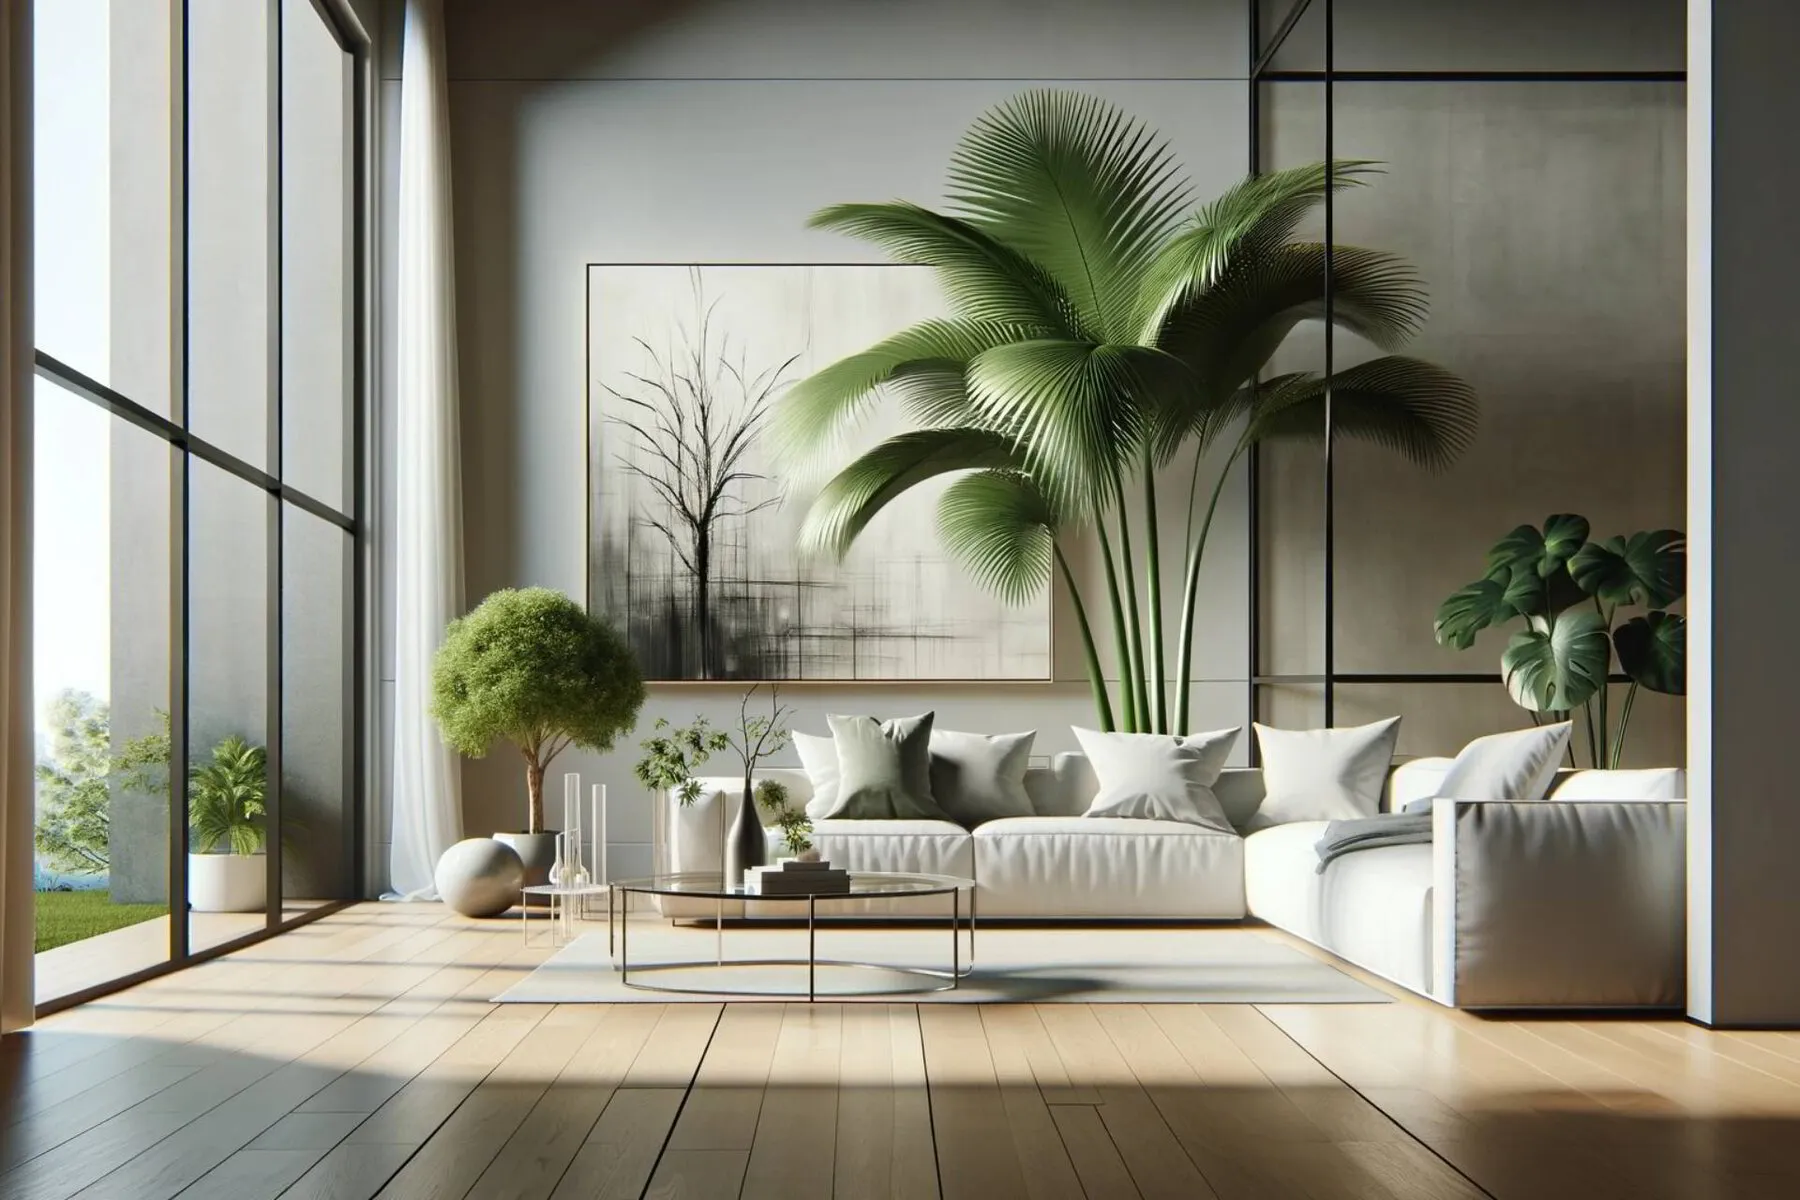 A modern home interior featuring a bamboo palm as the focal point